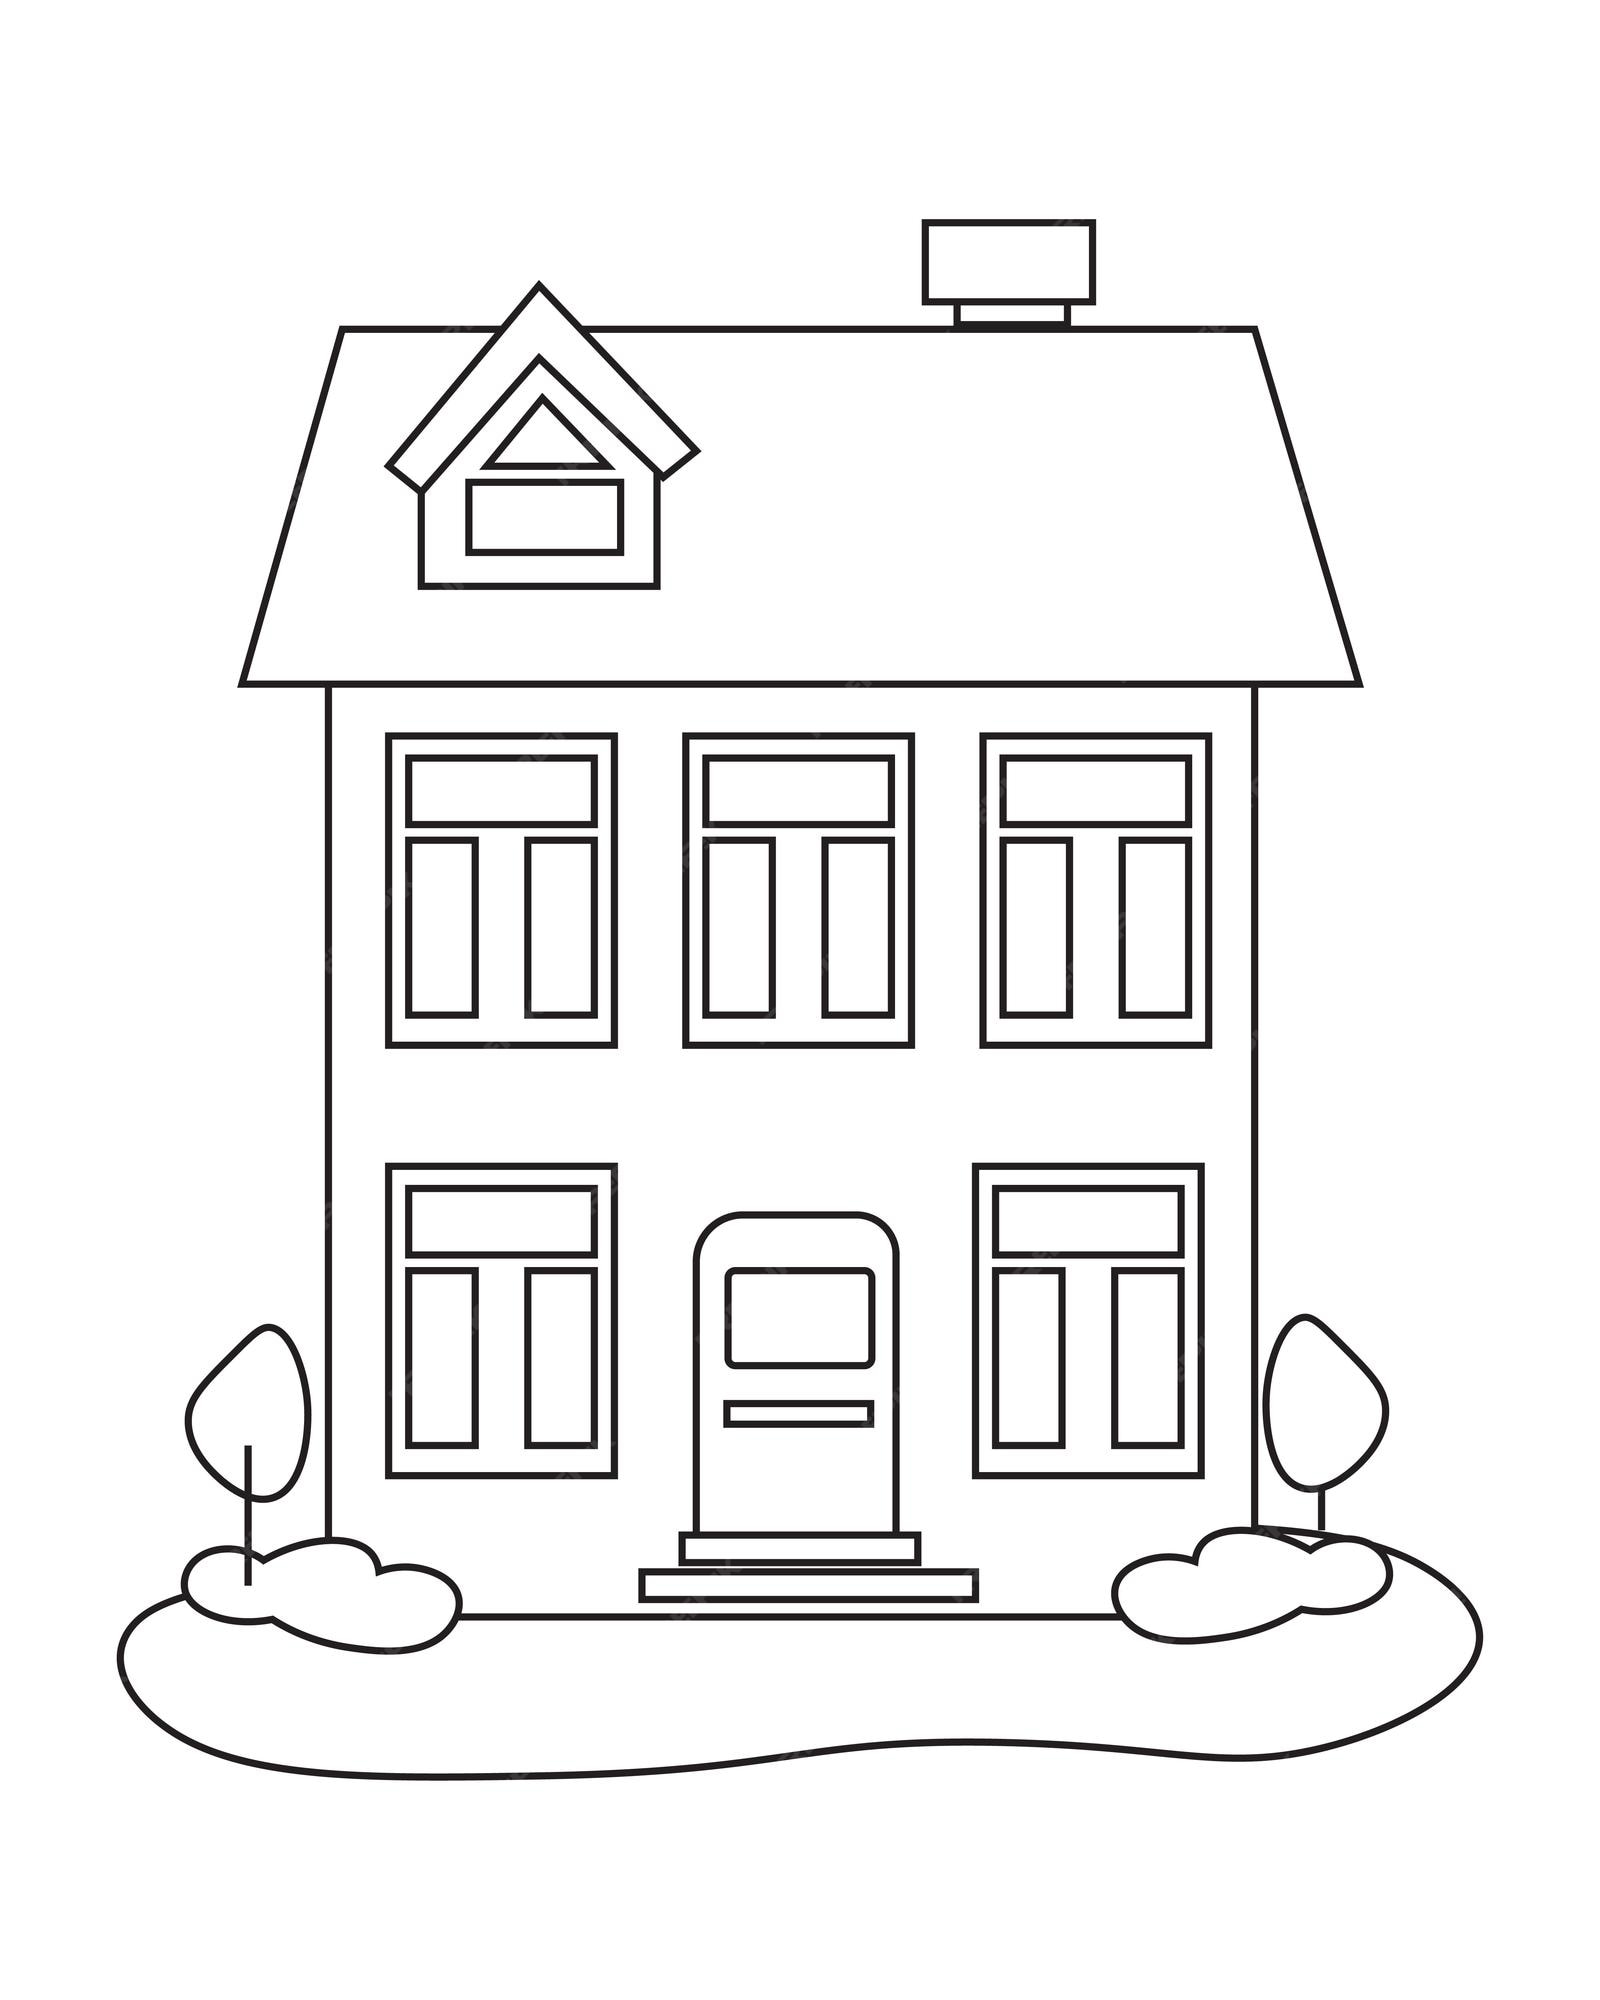 Premium Vector   Simple house coloring pagehouse coloring pageline ...